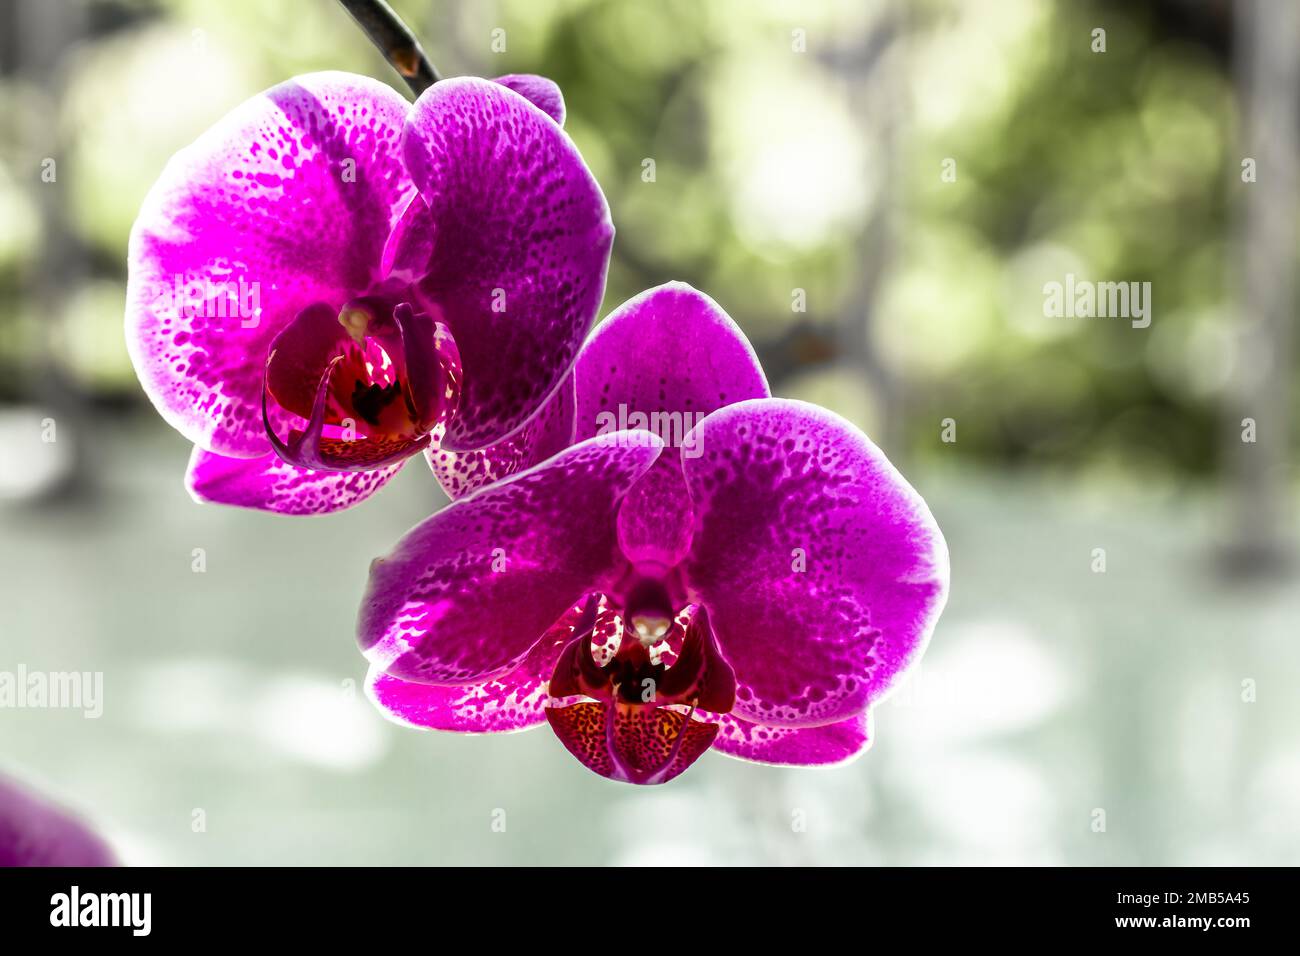 A pink sprig of moon orchid or moth orchid (phalaenopsis amabilis) in bloom, blurred green leaves background and bright sunlight Stock Photo